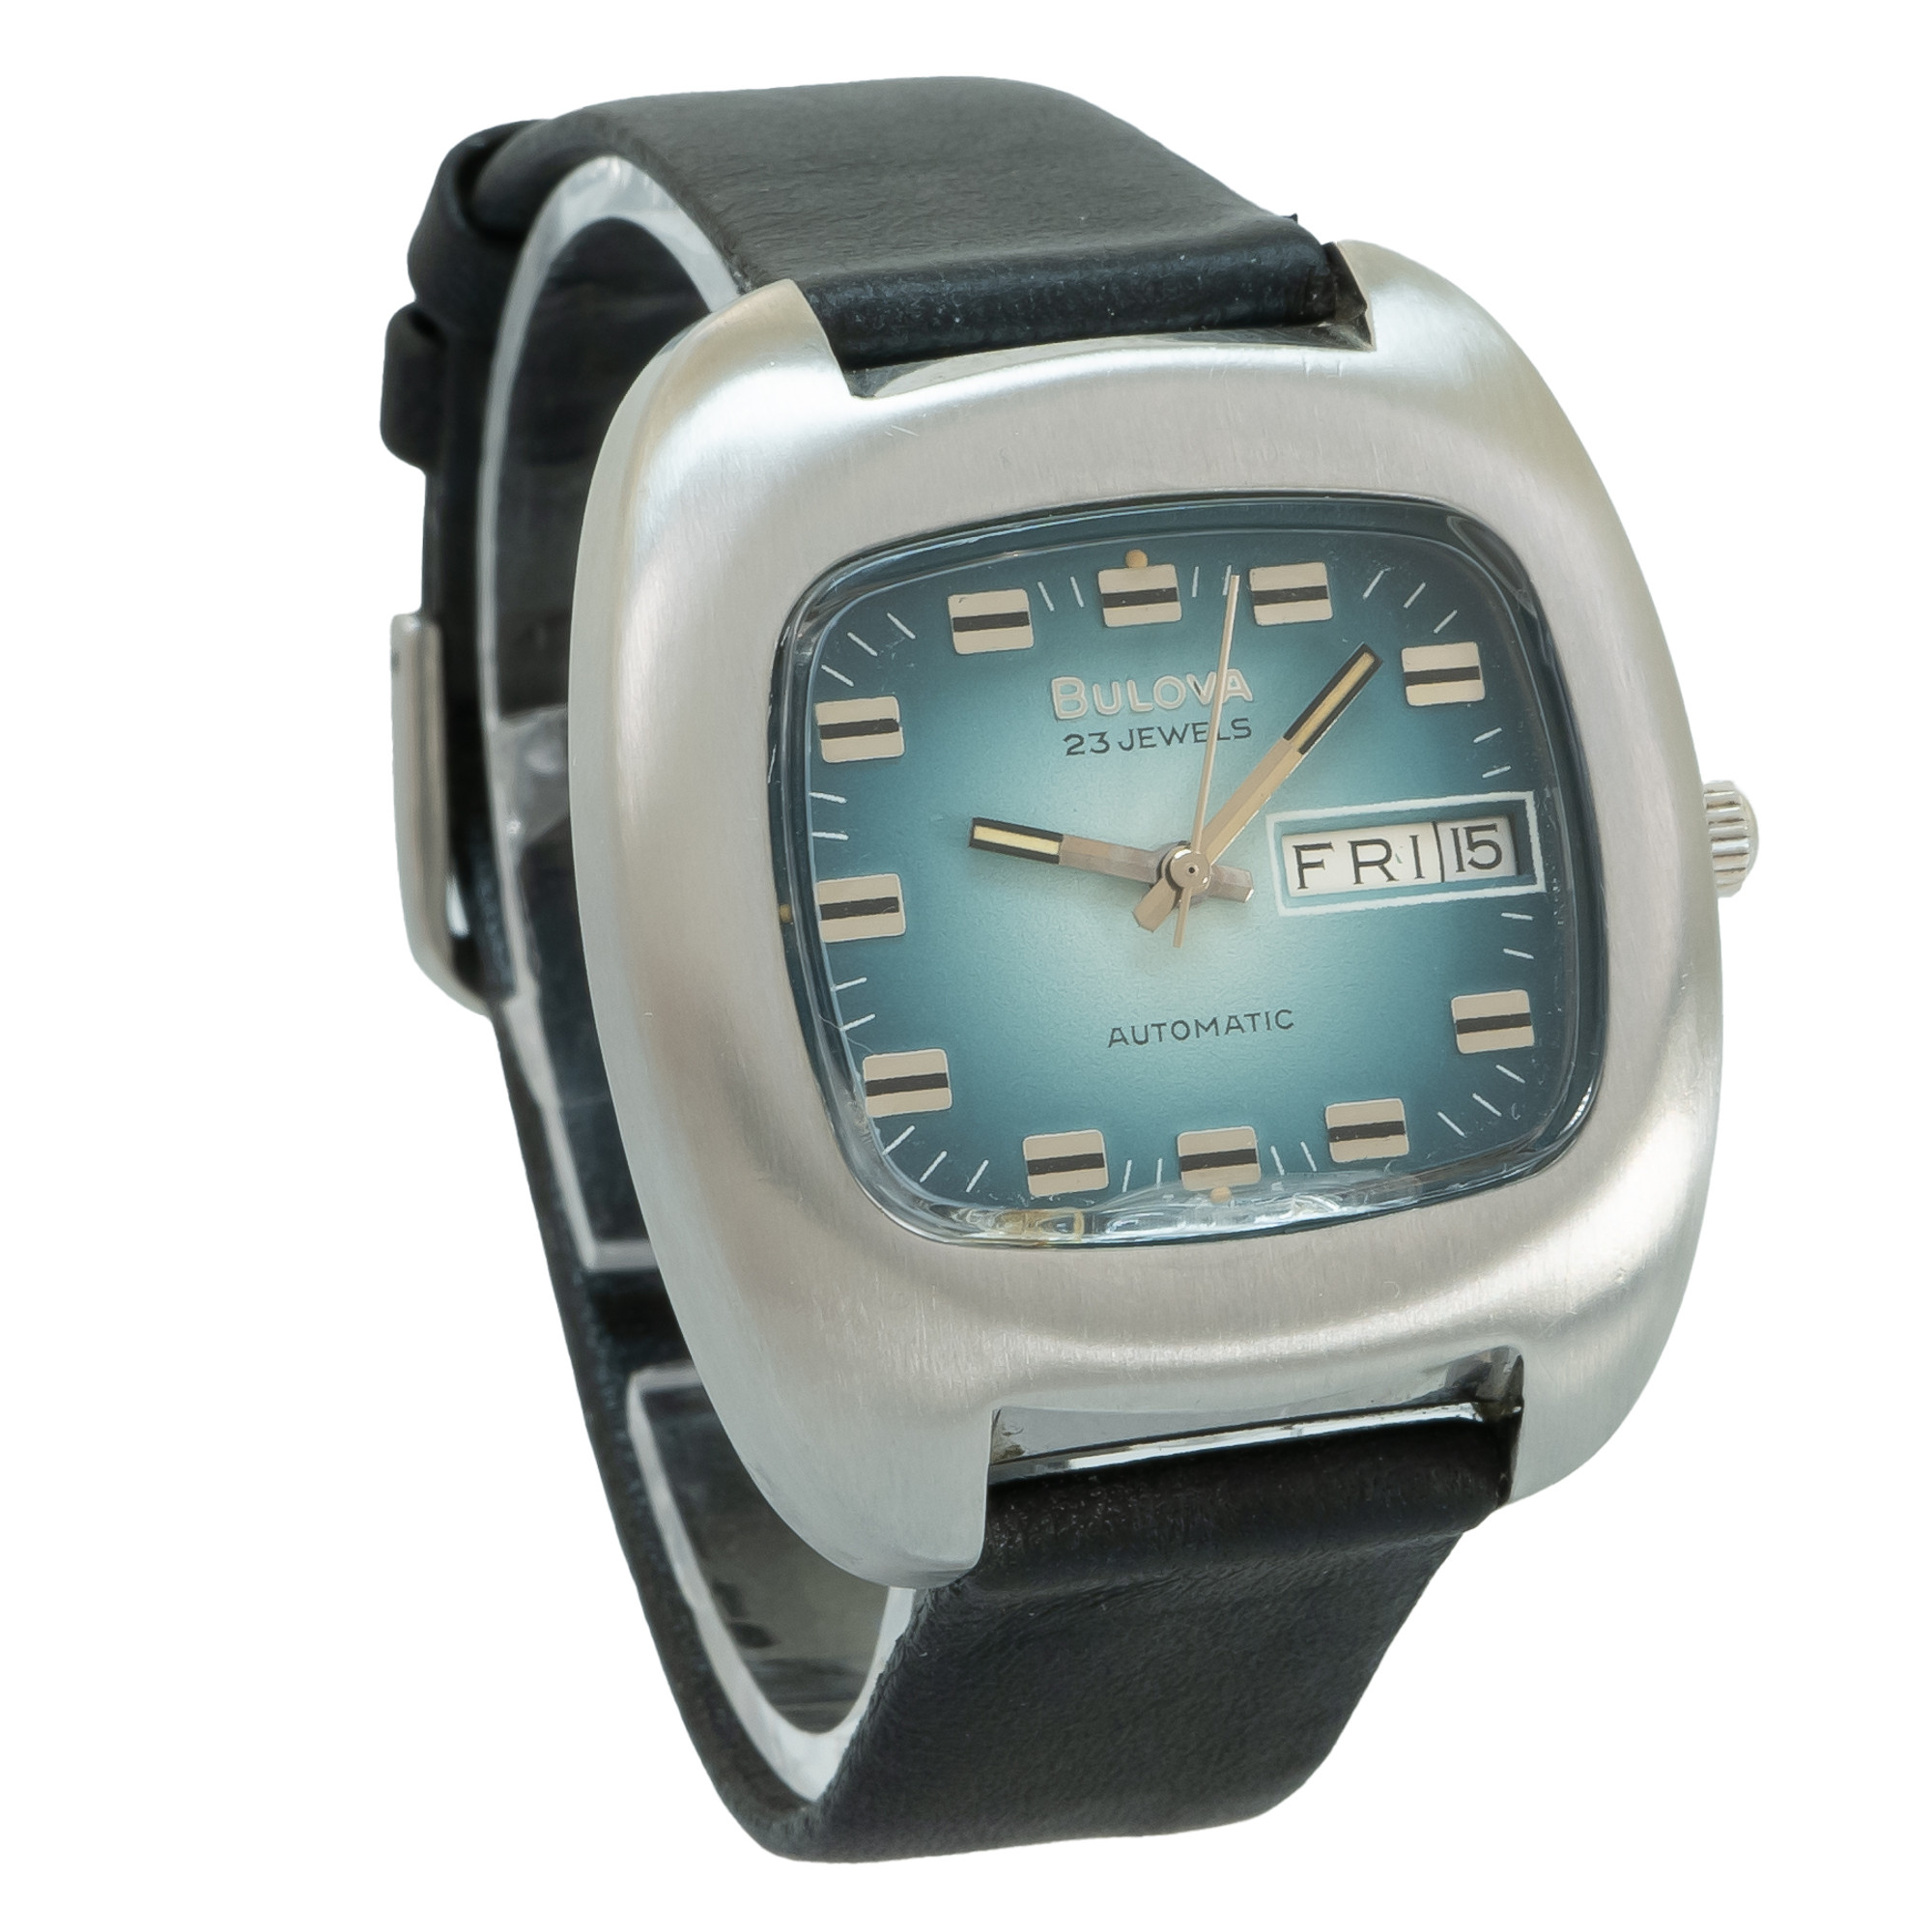 Bulova Cushion Case with Teal Dial Automatic Day Date *Vintage* - Inventory 4048